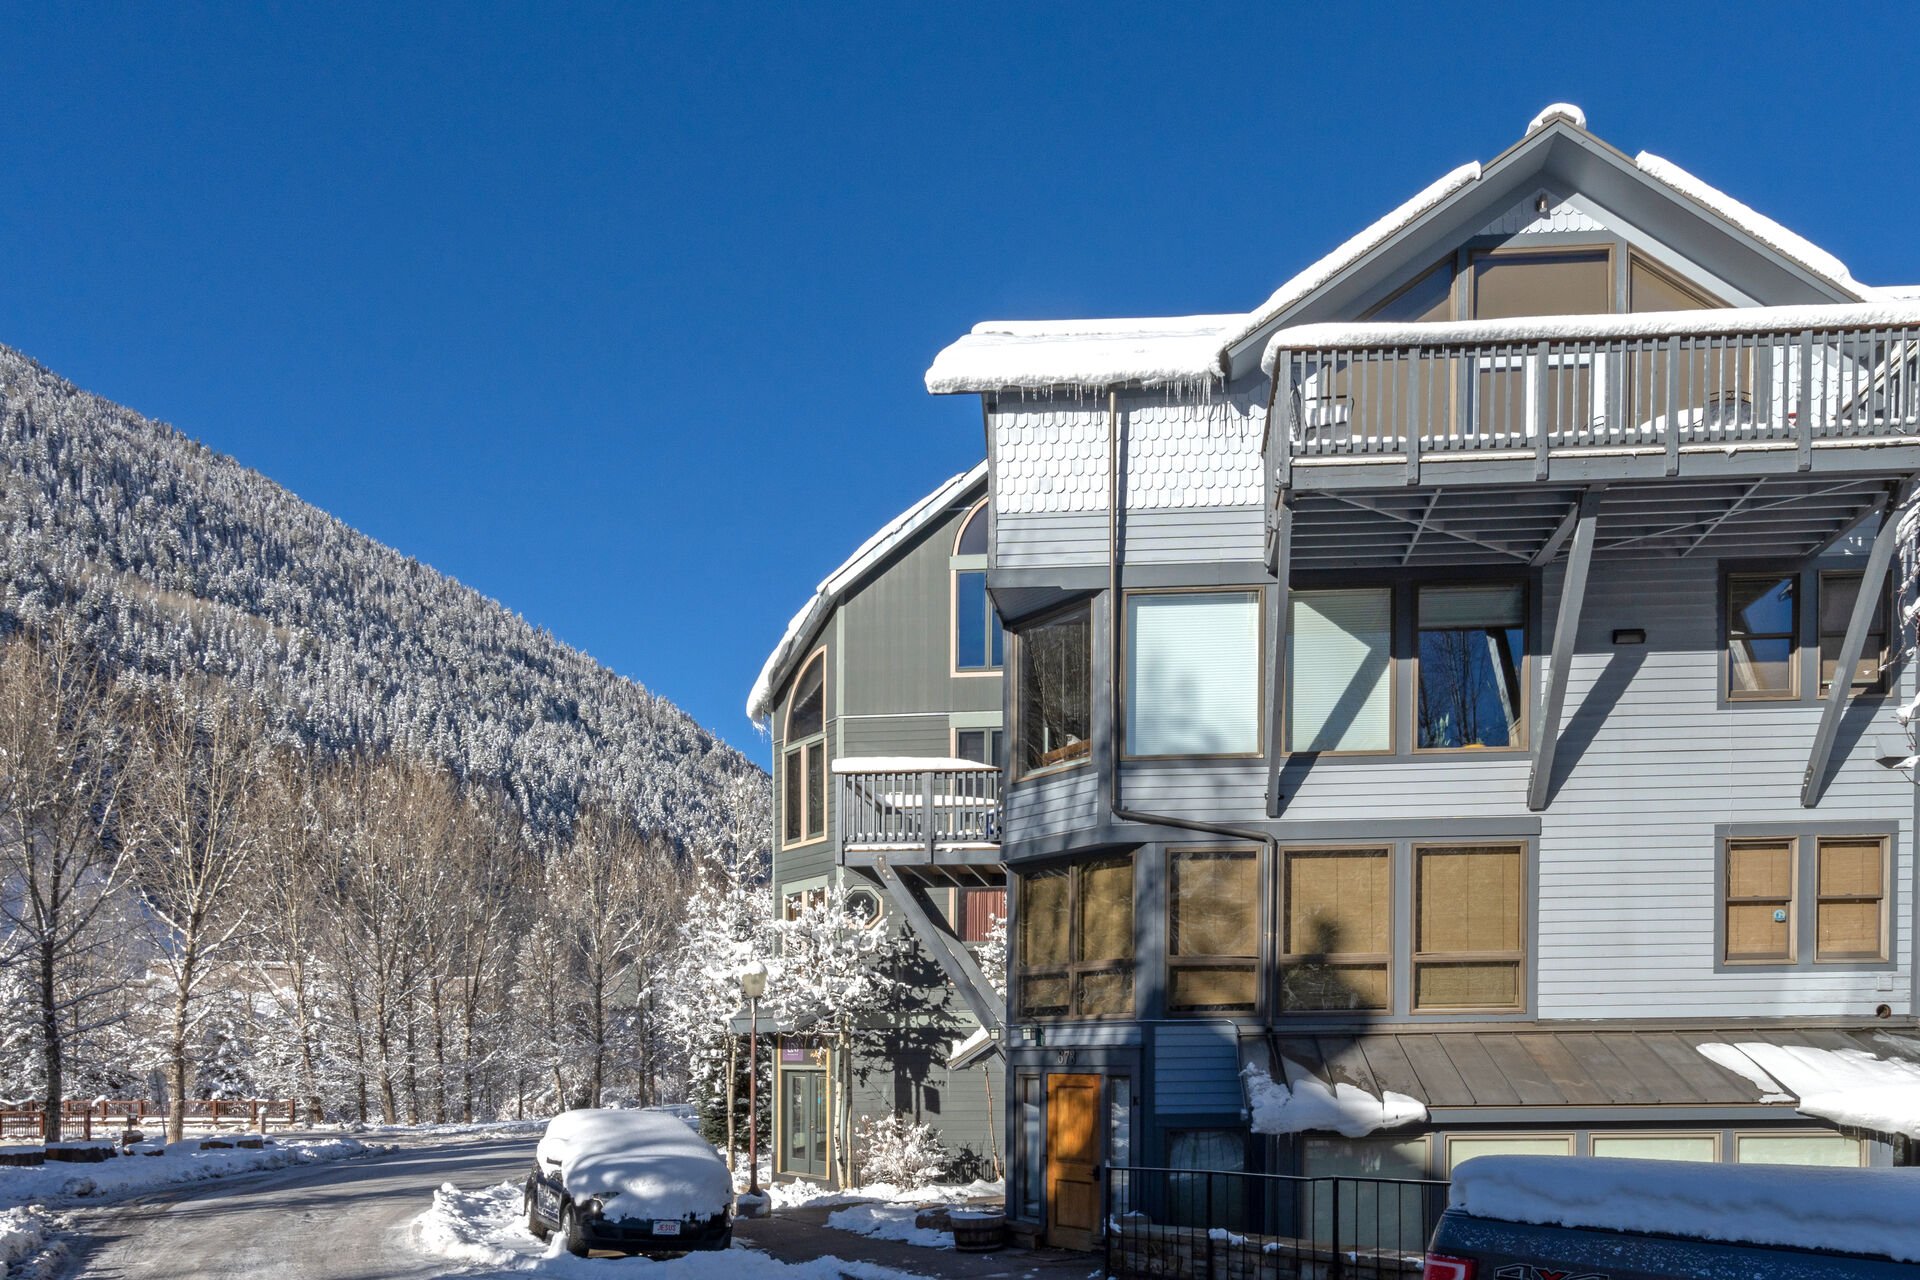 Side view of our Plunge H Telluride vacation condo